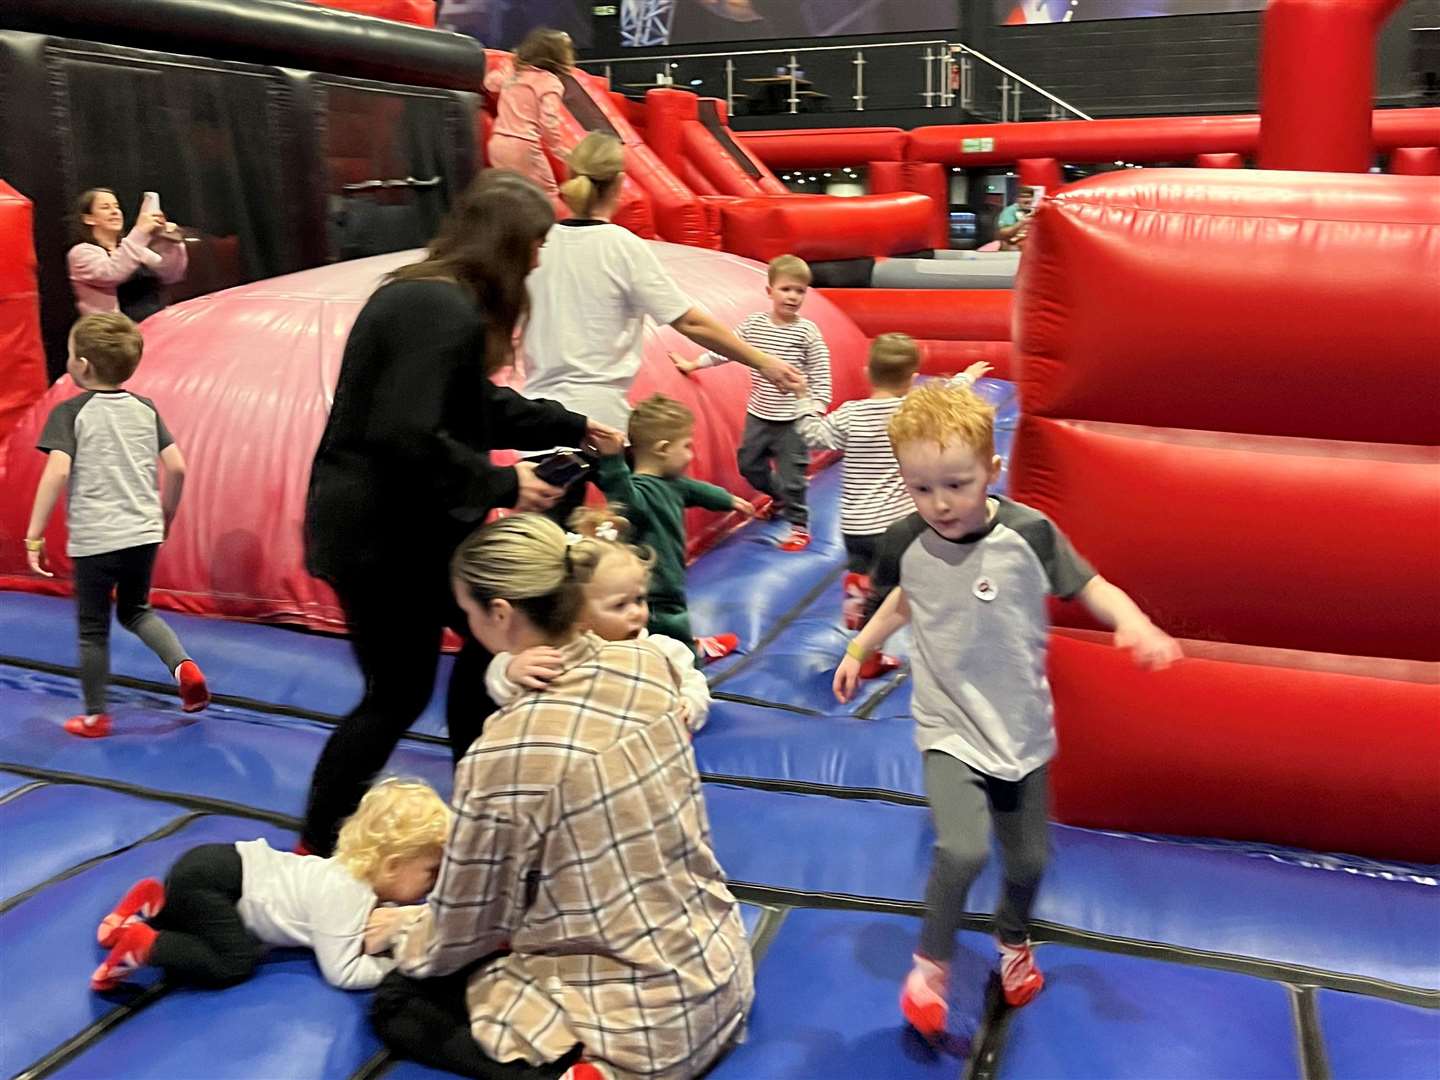 Toddlers enjoying the giant inflatable for the first time at Ninja Warrior UK Adventure Park in Chatham